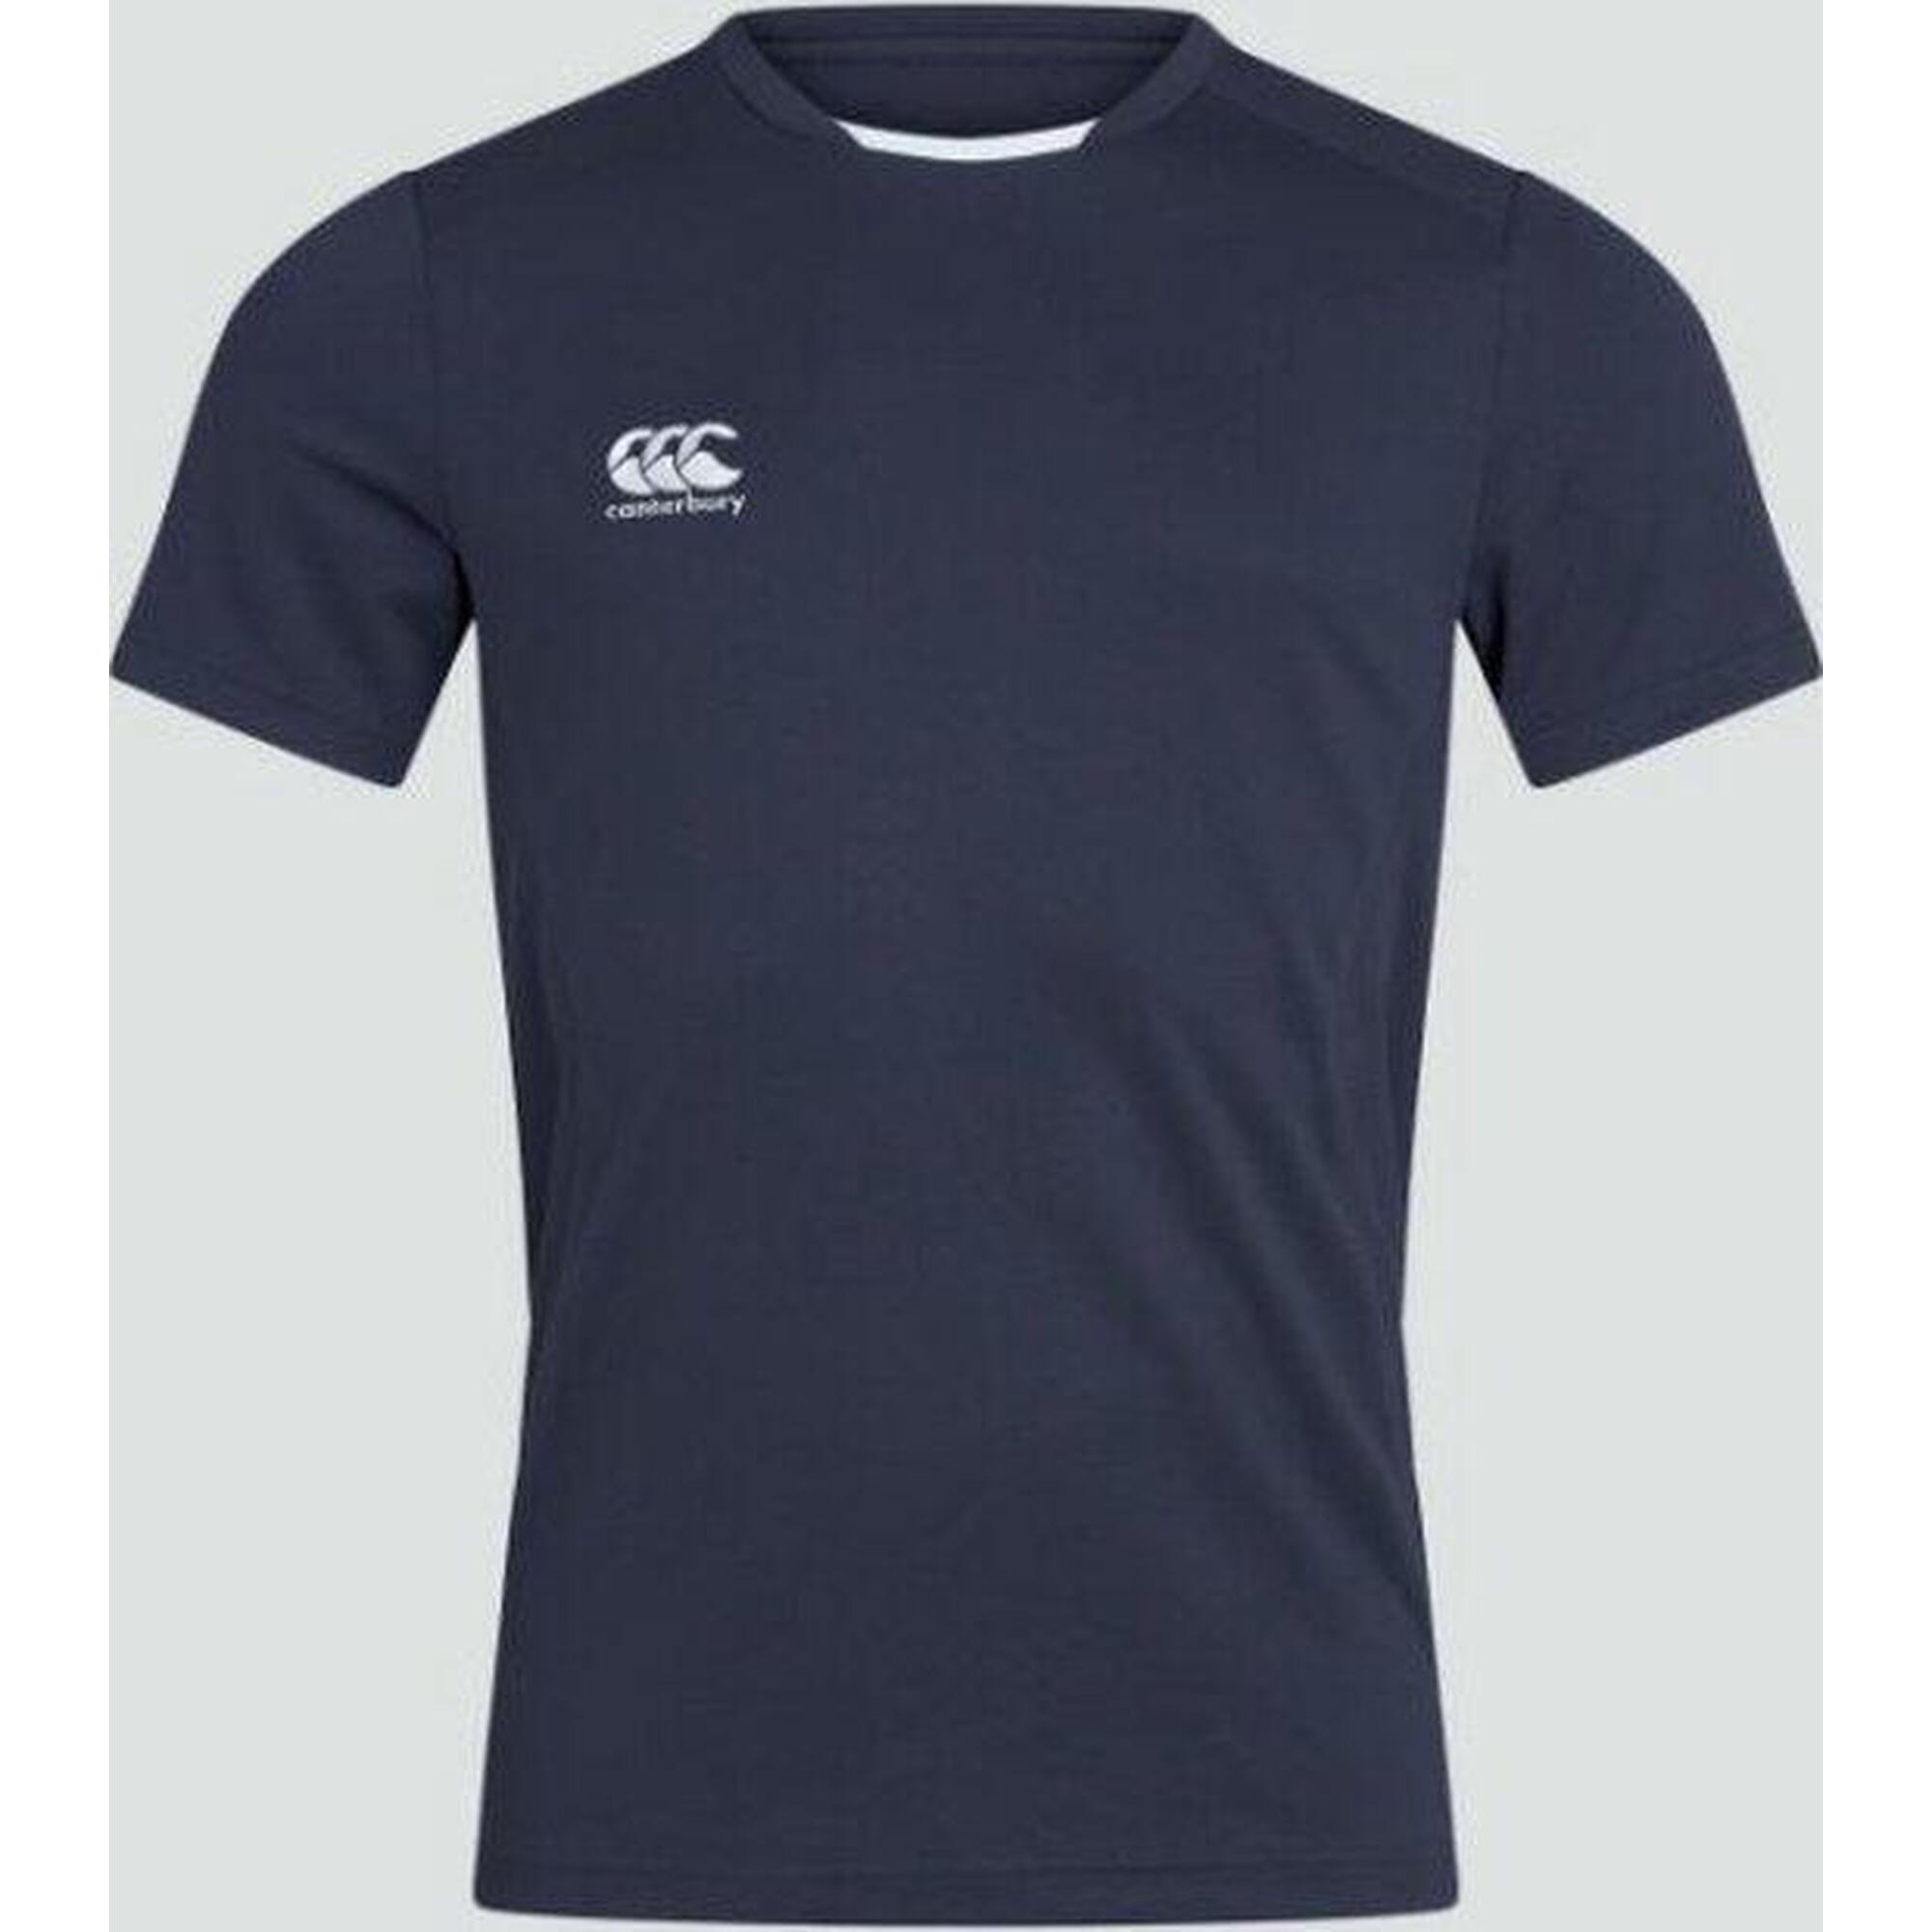 T-shirt sport rugby - hommes Adultes Marine